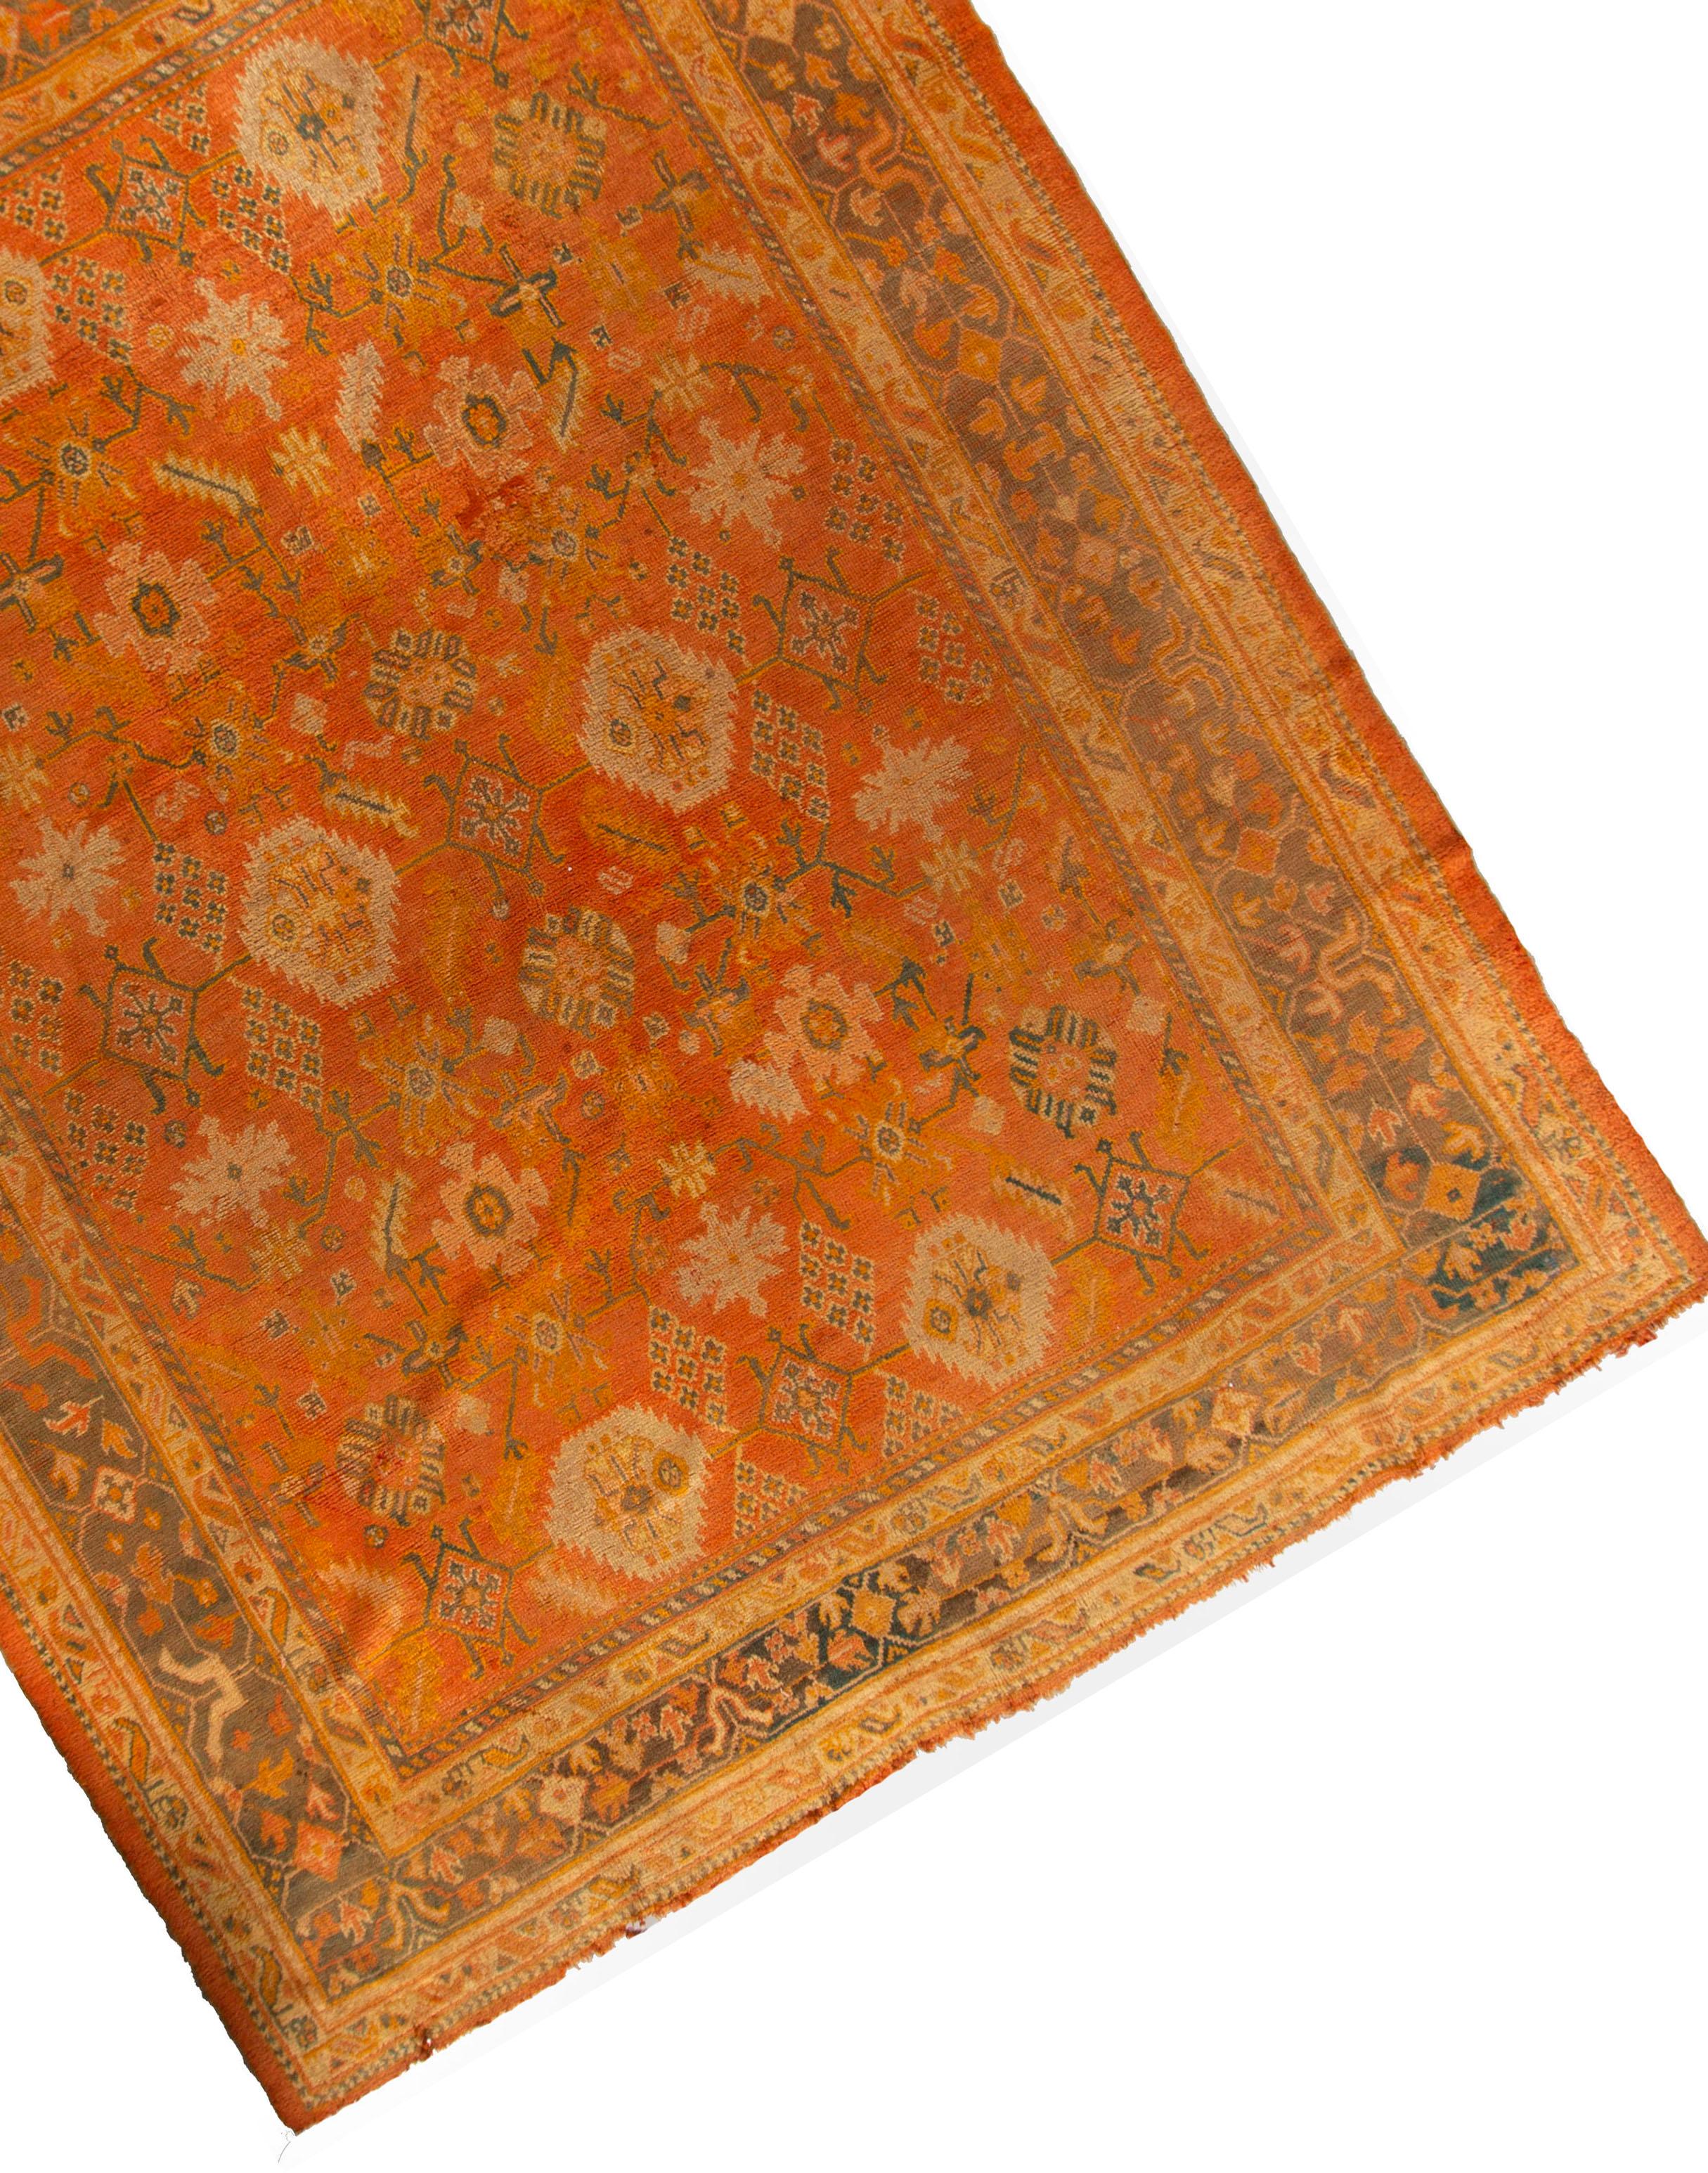 Antique Turkish Oushak Area rug 10'3 X 13'. Even today, Oushak rugs are still the first choice of professional interior designers. Sometimes this is because when grading Oushak carpets, carpet connoisseurs will not only look at the overall quality